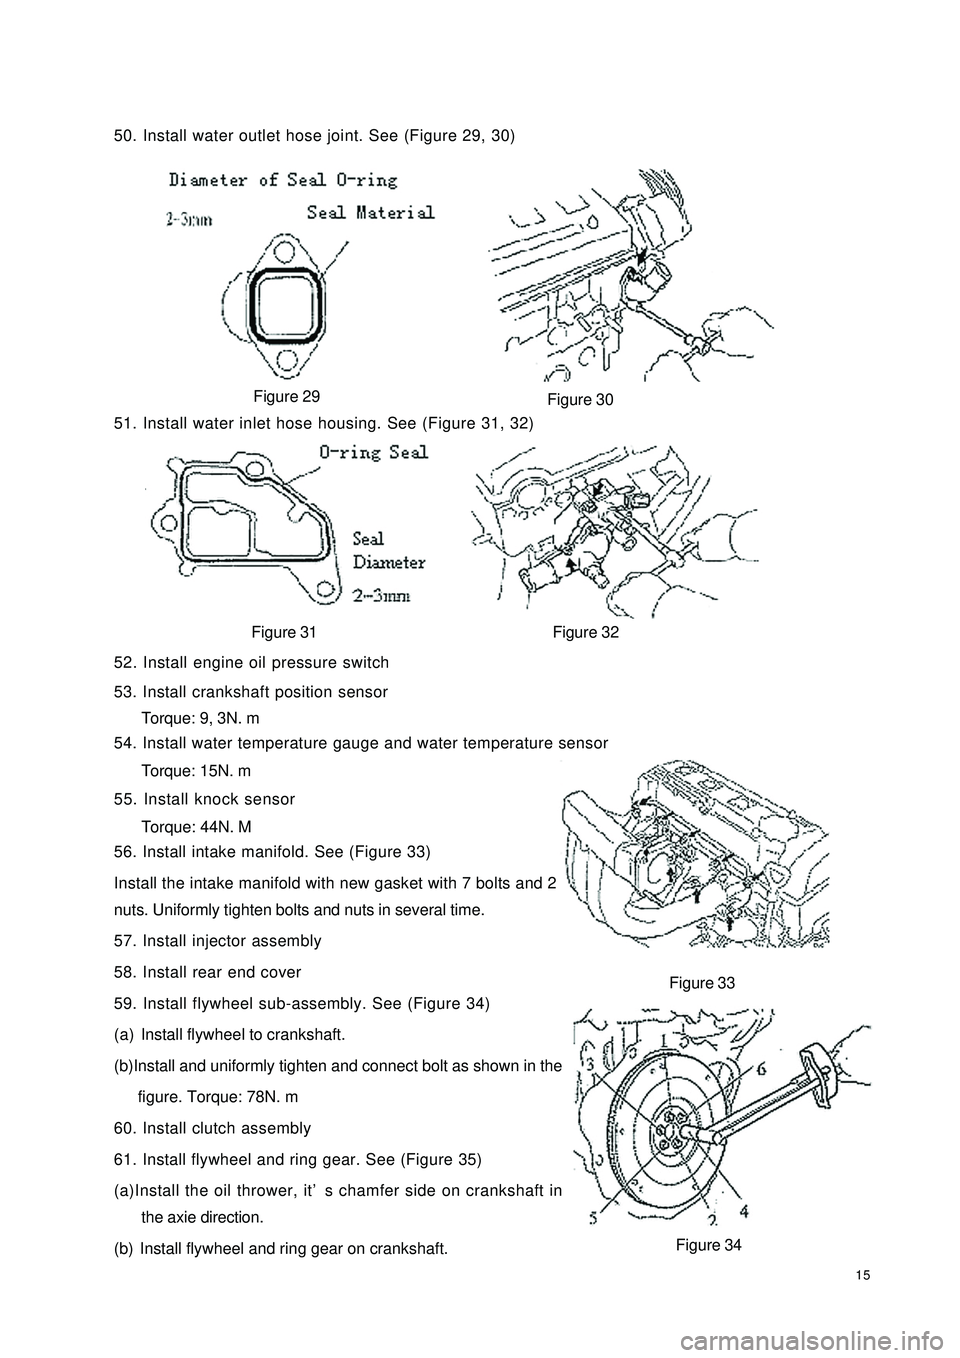 GEELY CK 2008  Workshop Manual 1550. Install water outlet hose joint. See (Figure 29, 30)
Figure 29 
51. Install water inlet hose housing. See (Figure 31, 32)
Figure 31  Figure 32
52. Install engine oil pressure switch
53. Install 